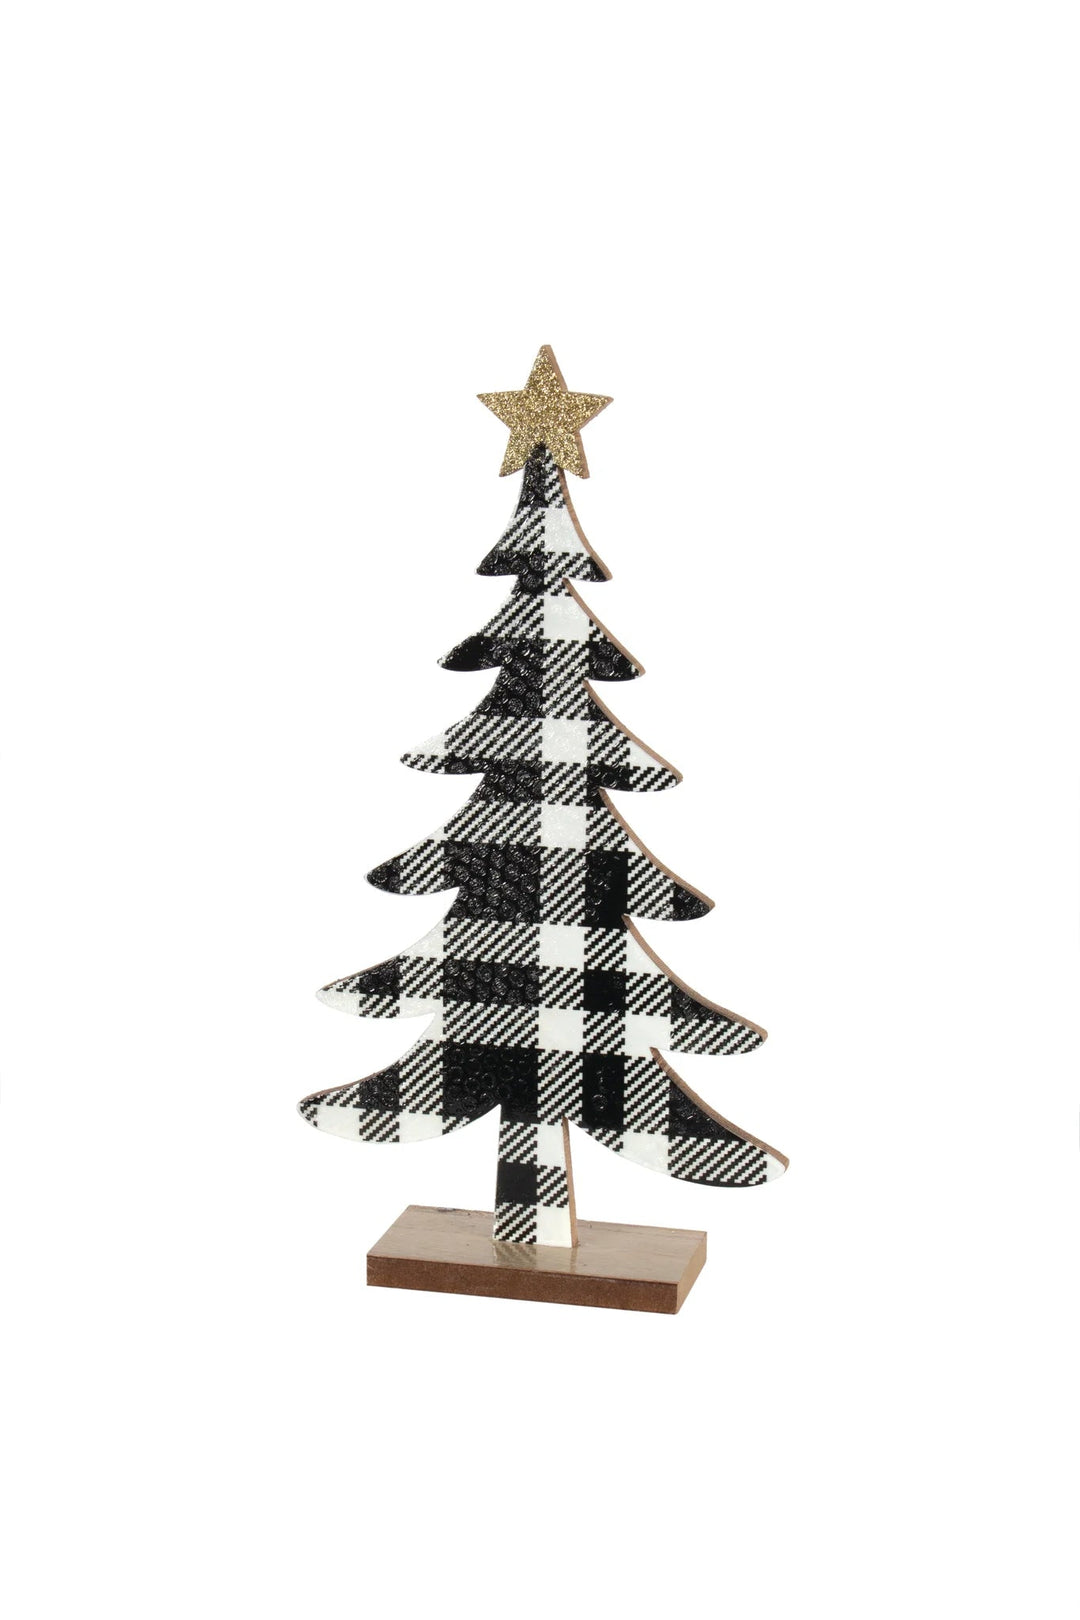 Black and White Wooden Christmas Tree, Table Decor
